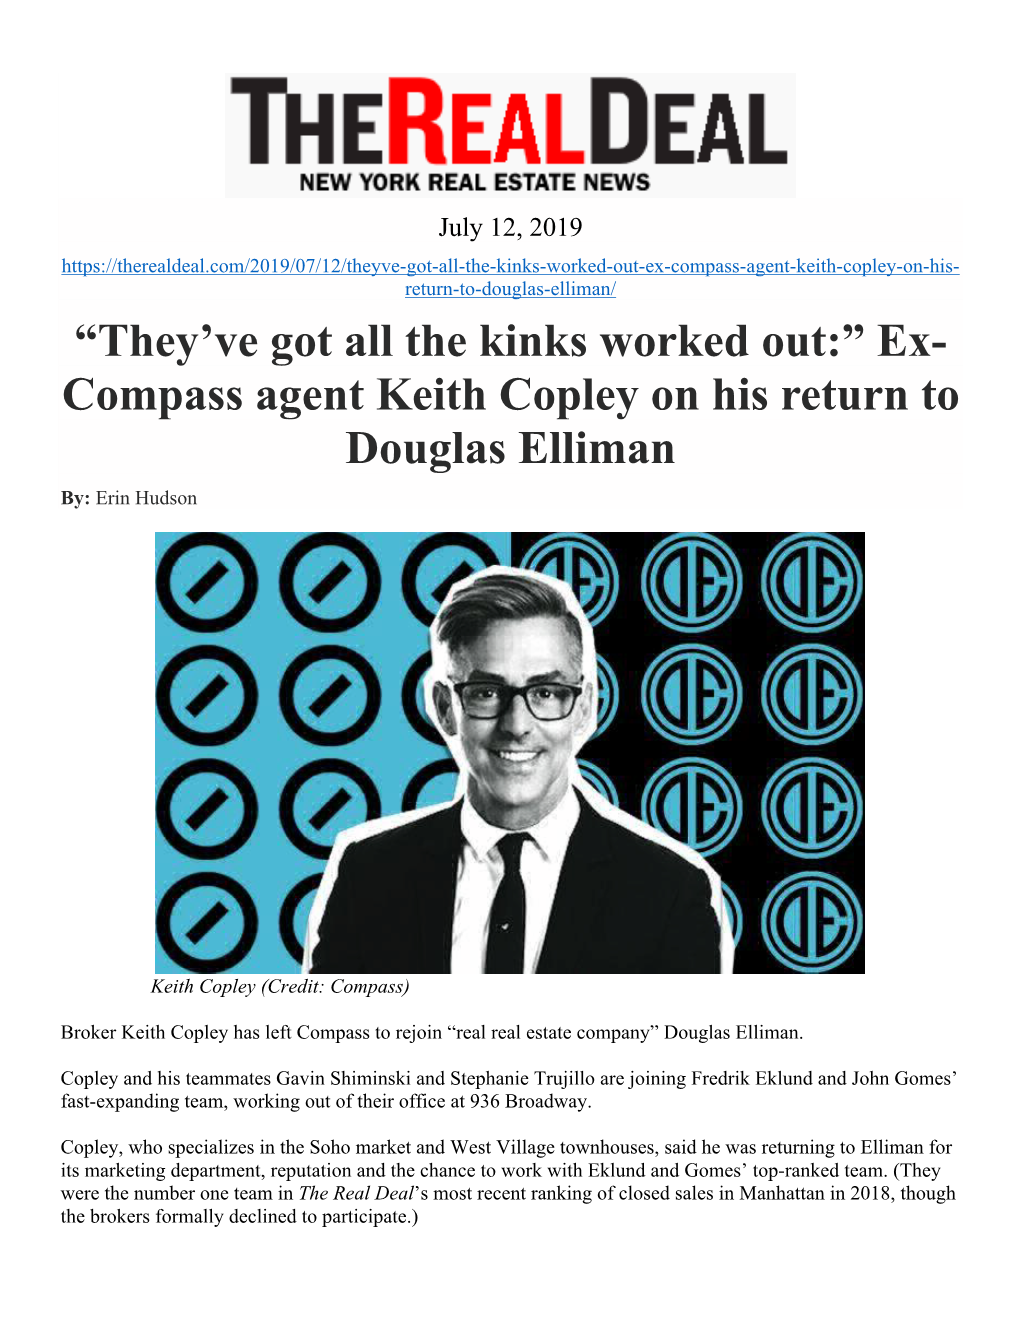 “They've Got All the Kinks Worked Out:” Ex- Compass Agent Keith Copley on His Return to Douglas Elliman